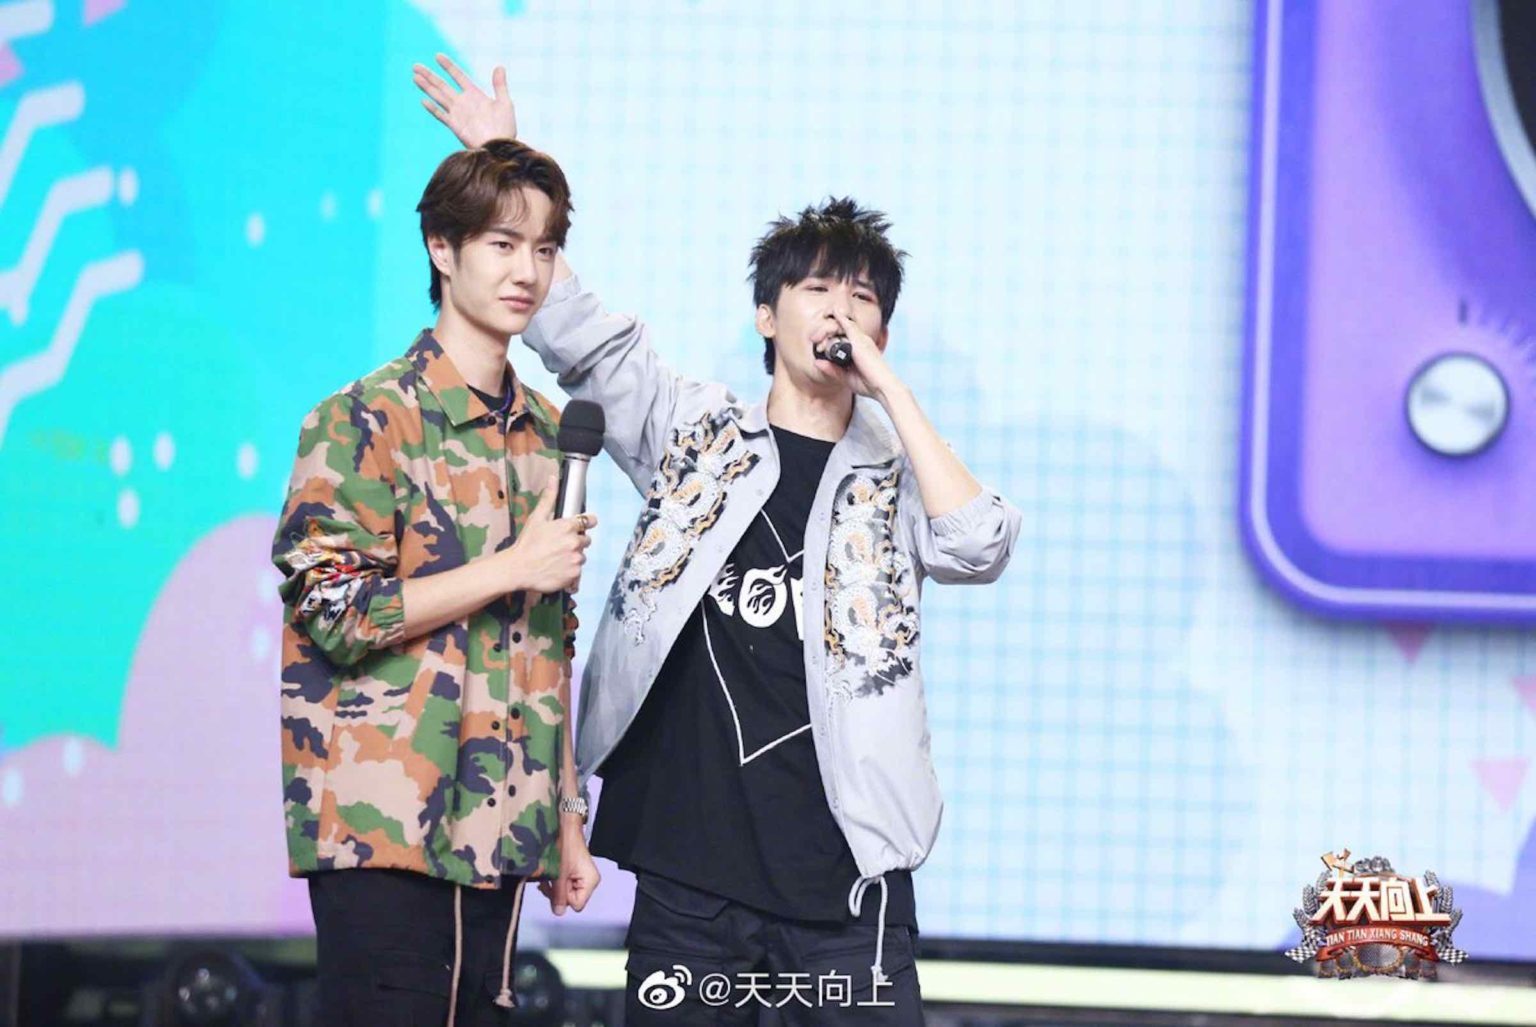 We discovered that Wang Yibo is a co-host of a popular variety show that airs in China called 'Day Day Up'. Here's all you need to know.